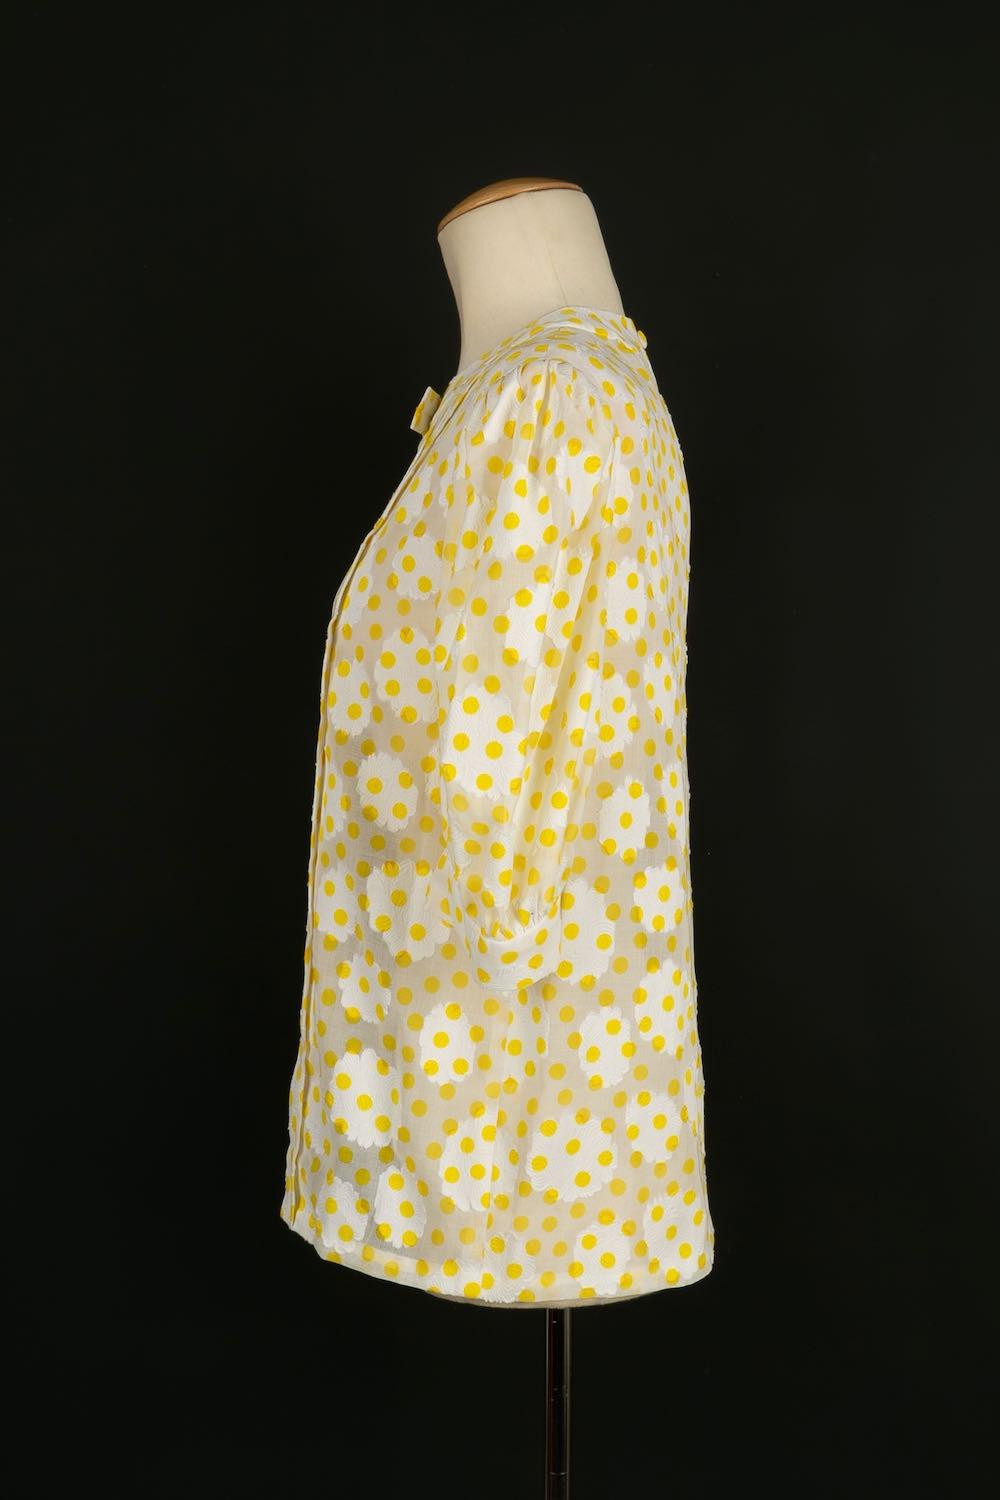 Pretty vintage white blouse with yellow polka dots. No size tag, it fits a 36FR.

Additional information:
Condition: Very good condition
Dimensions: Shoulder width: 41 cm - Chest: 44 cm - Sleeve length: 34 cm - Length: 58 cm

Seller Reference: FH14